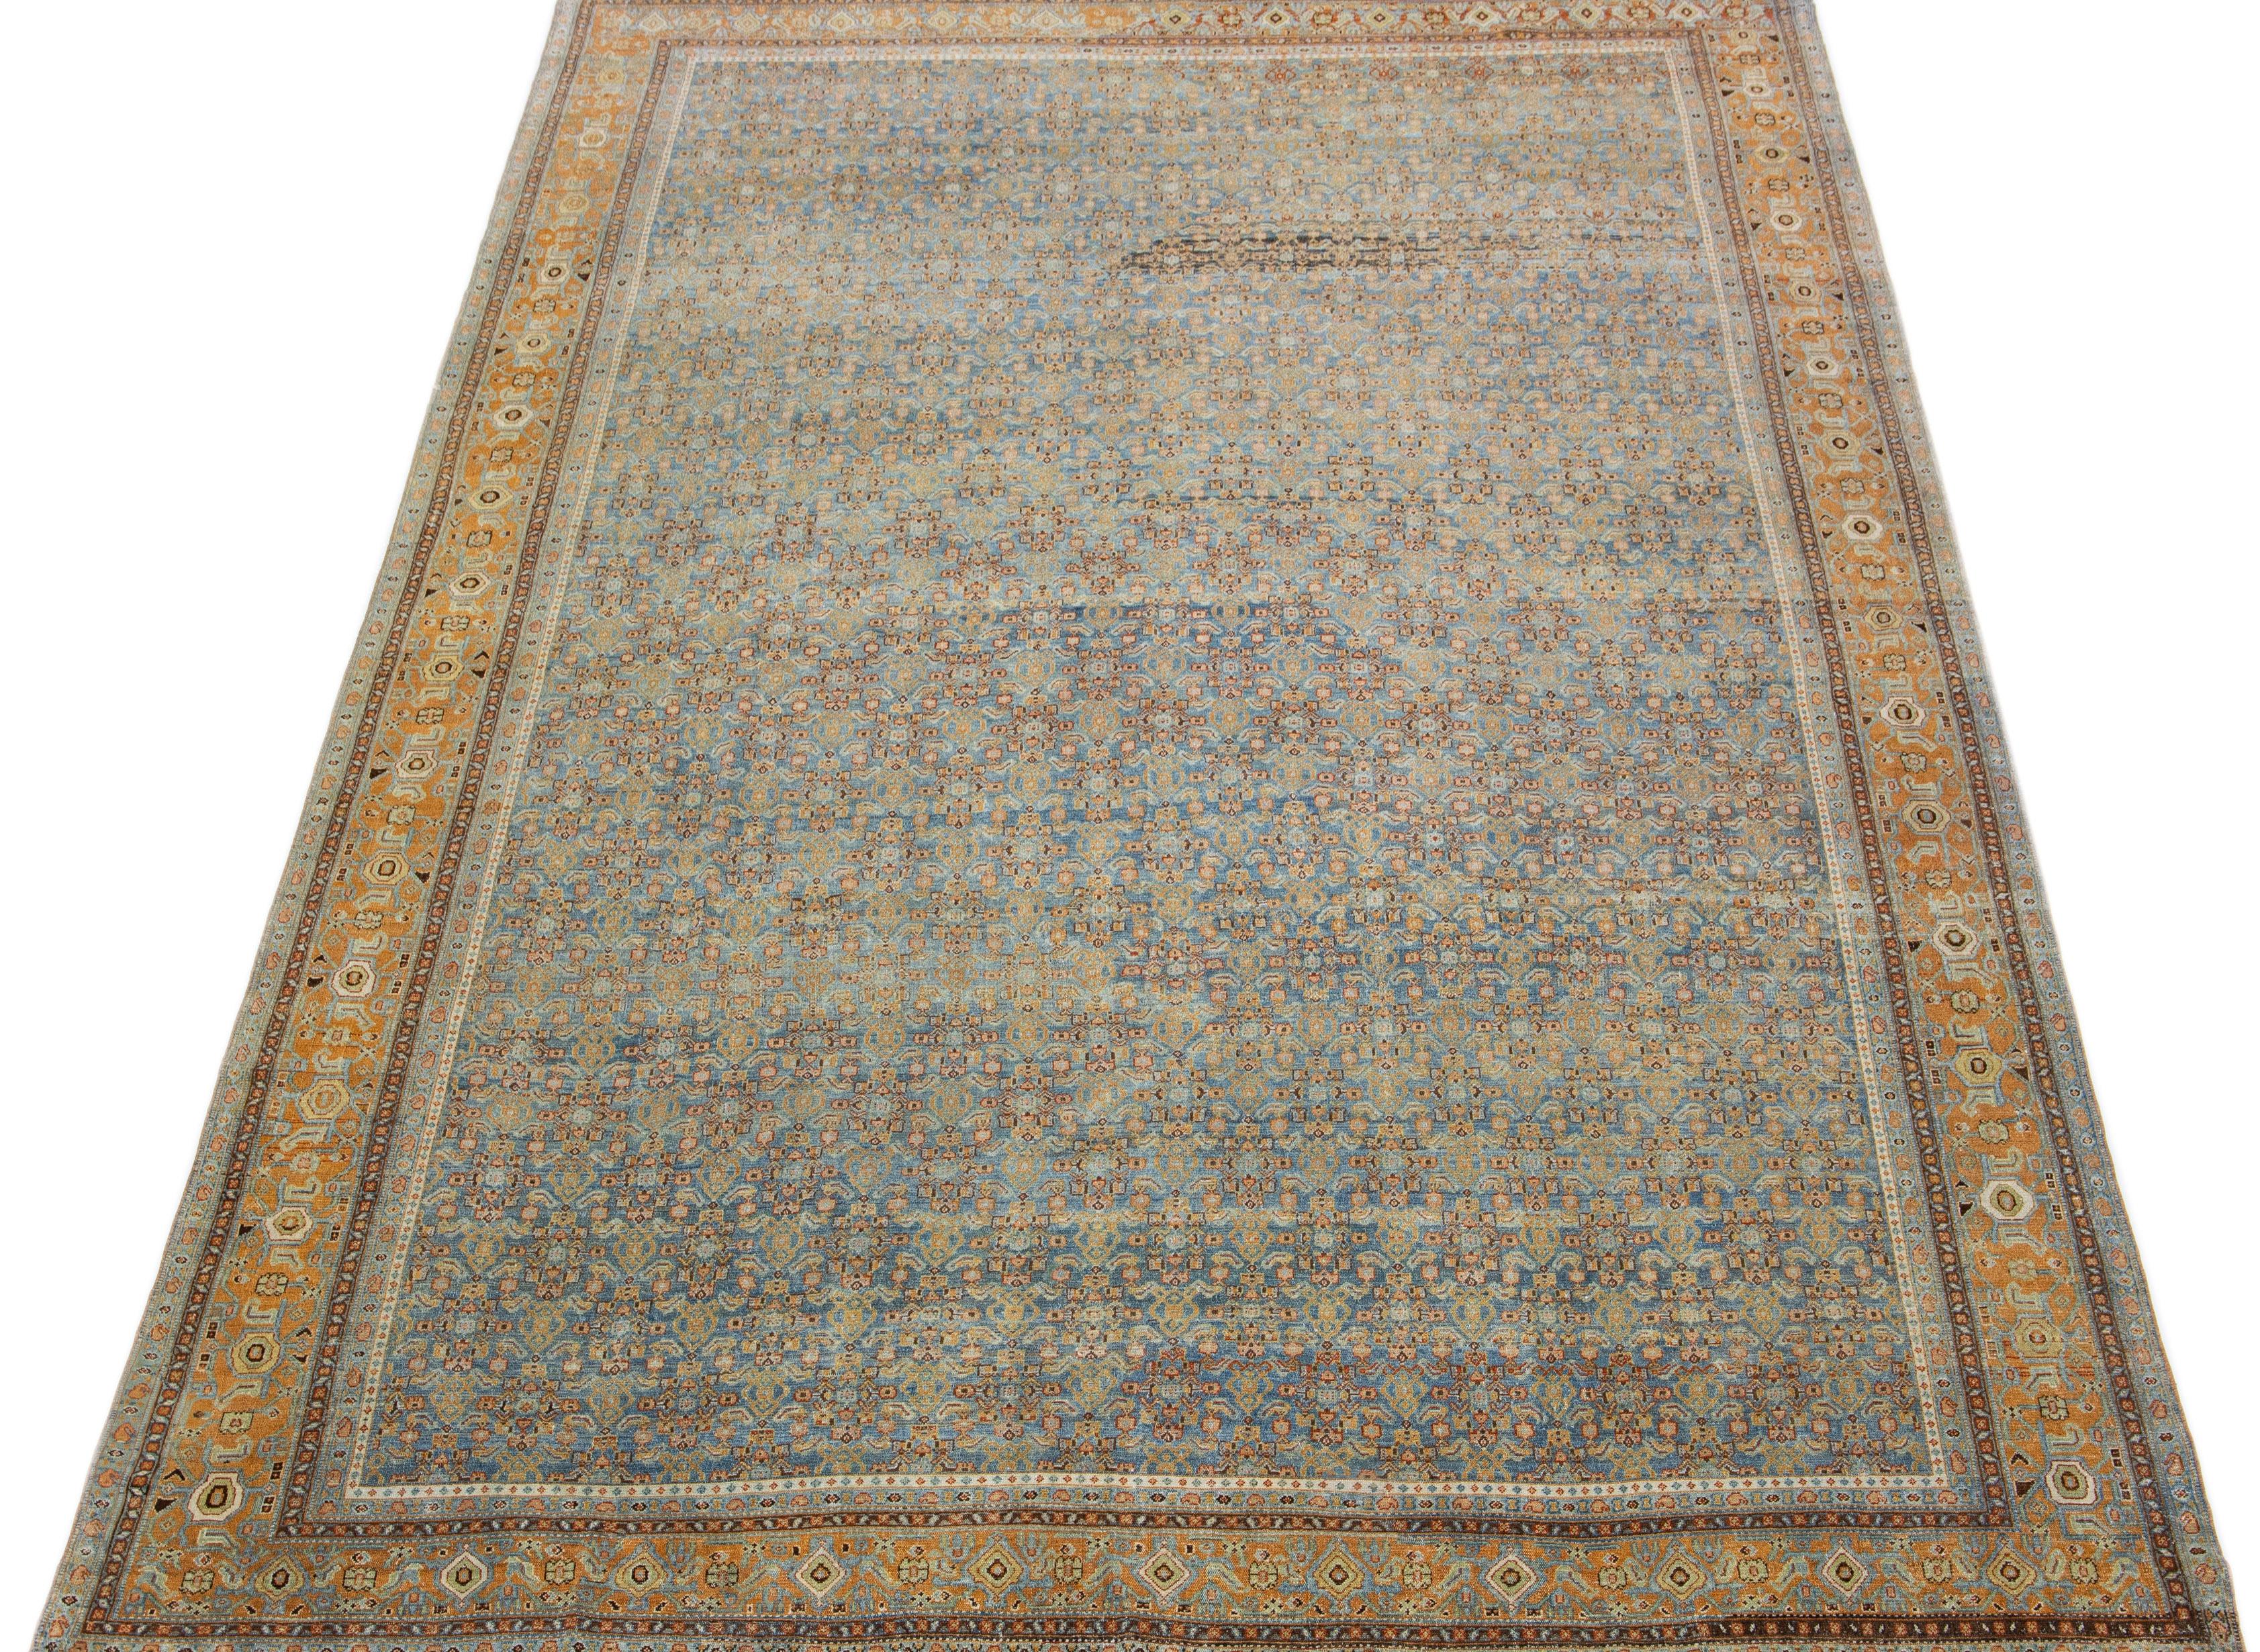 A beautiful Antique Malayer hand-knotted wool rug with a blue field. This Persian rug has beige and orange accents in an all-over floral design.

This rug measures 8'5